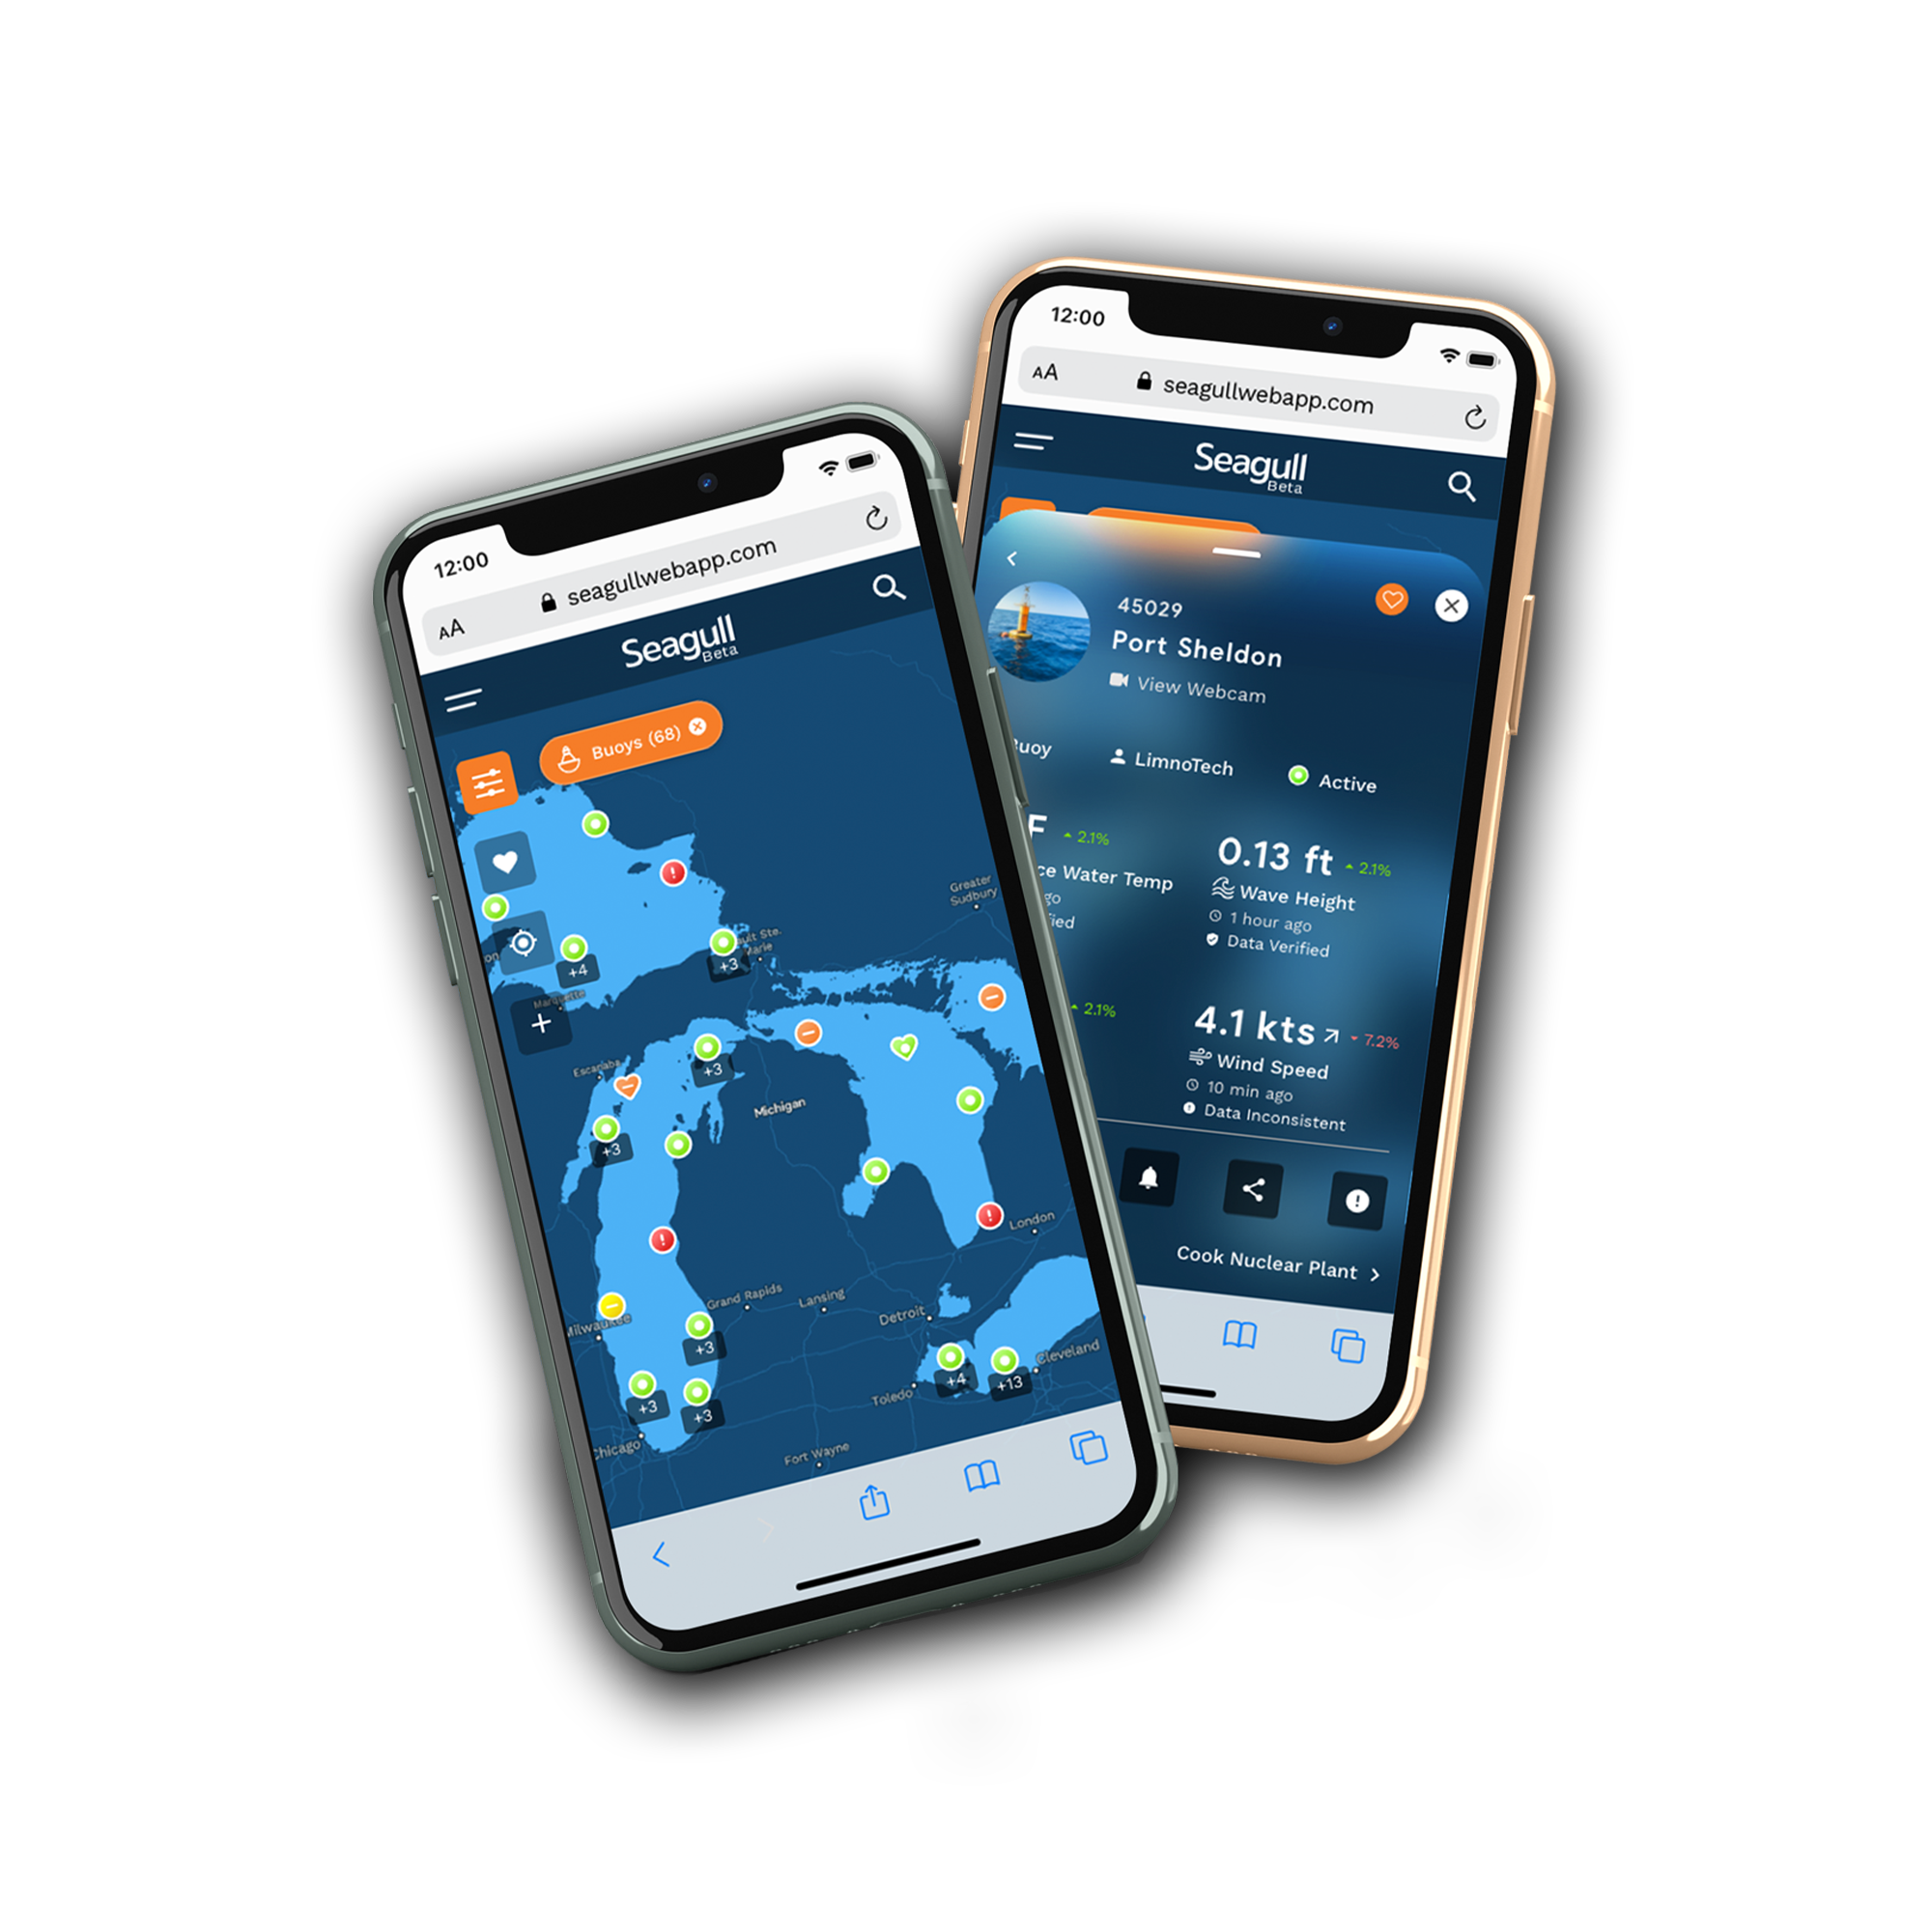 Seagull mobile application map and dashboard shown on two mobile devices